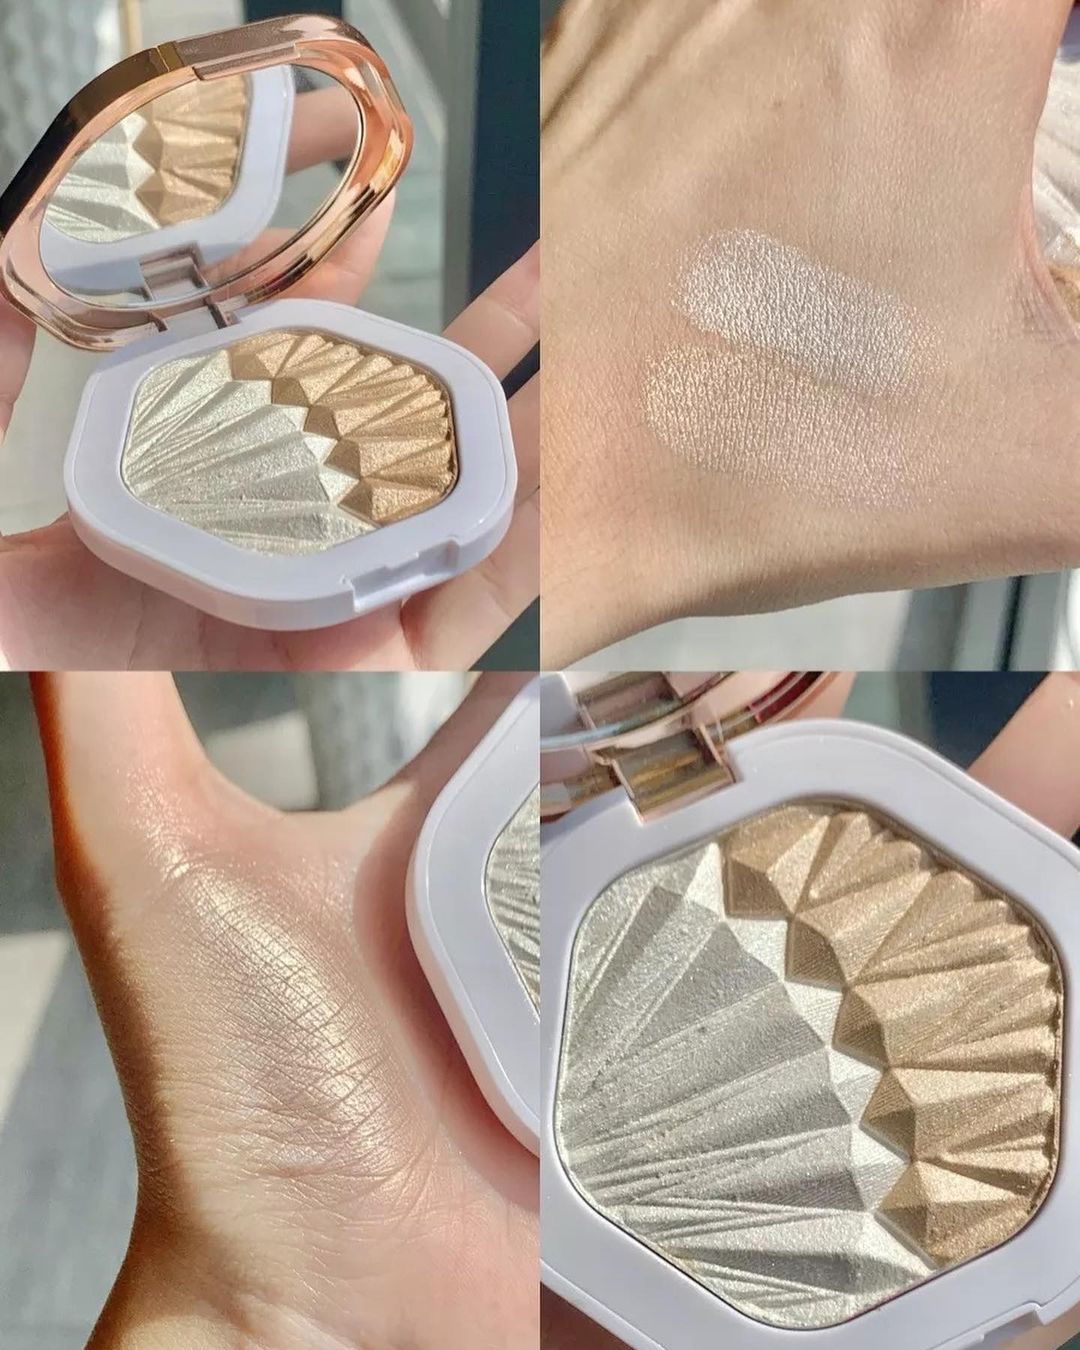 O.TWO.O 2 In 1 Highlighter Powdery Cake